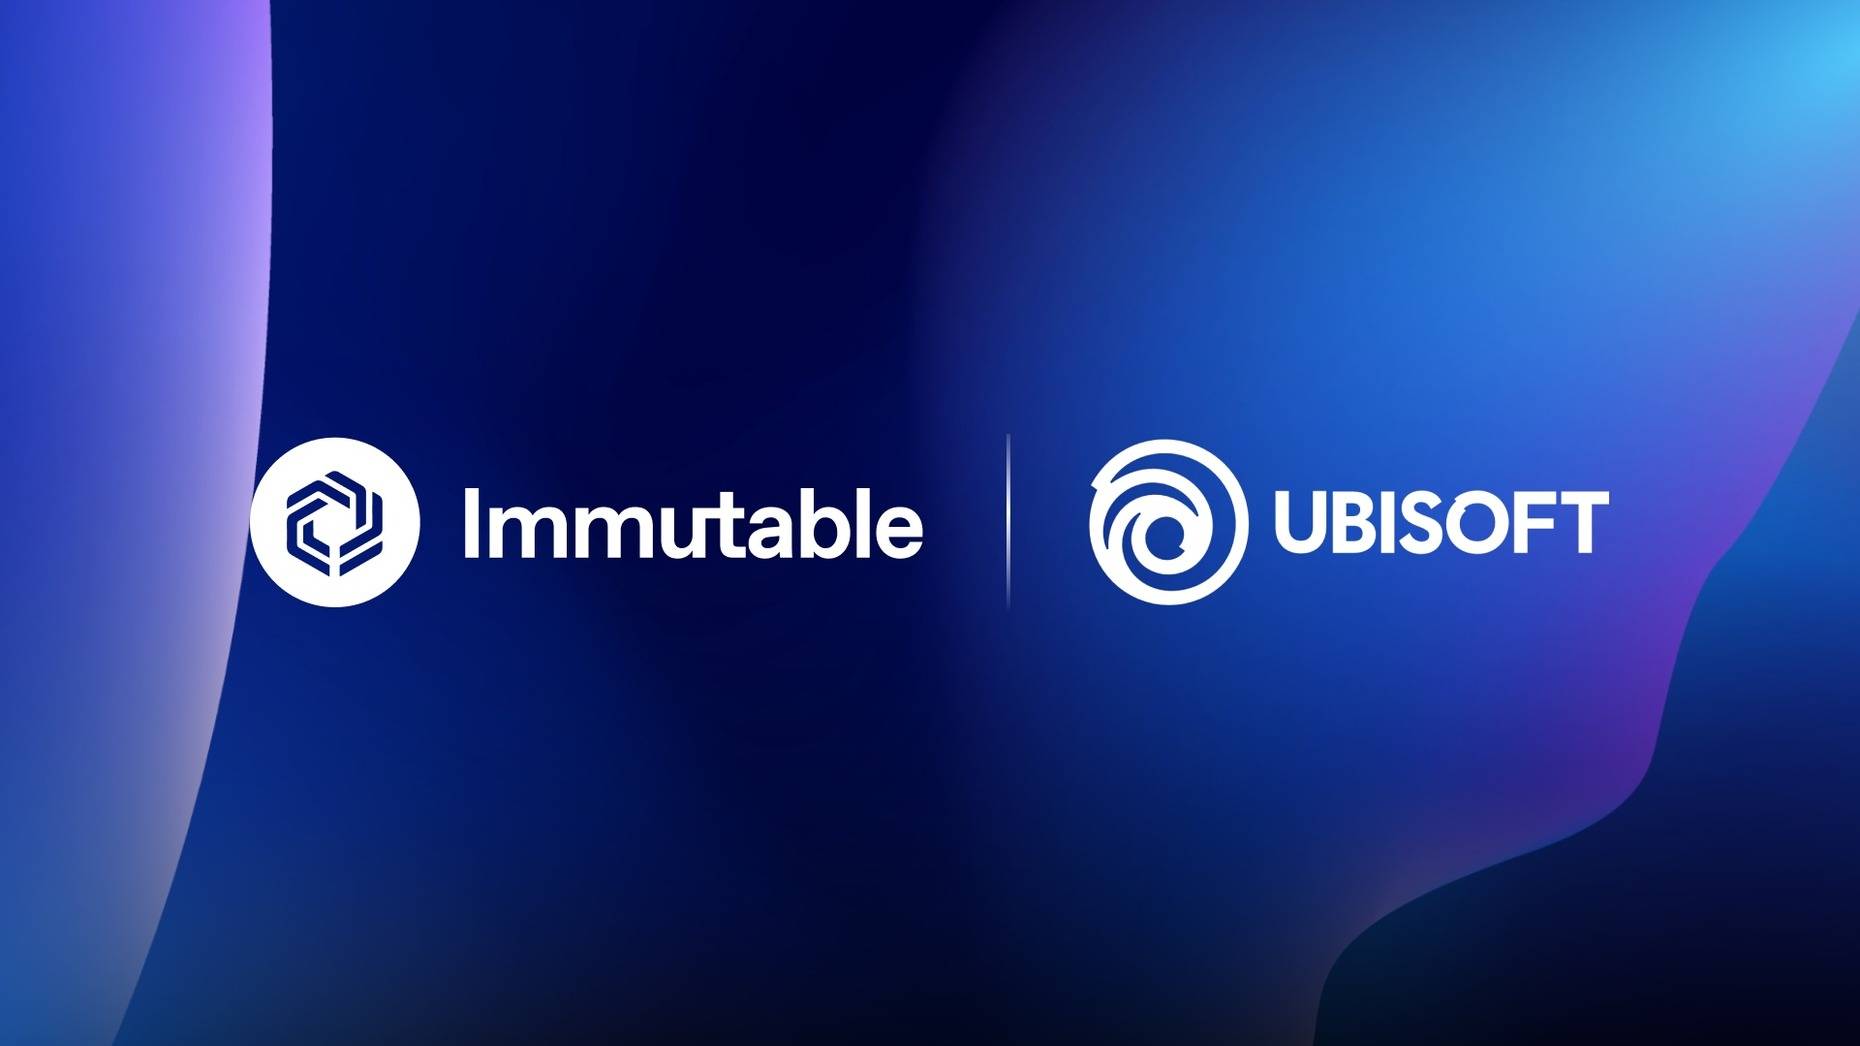 Ubisoft and Immutable Join Forces for Revolutionary Web3 Gaming Experience